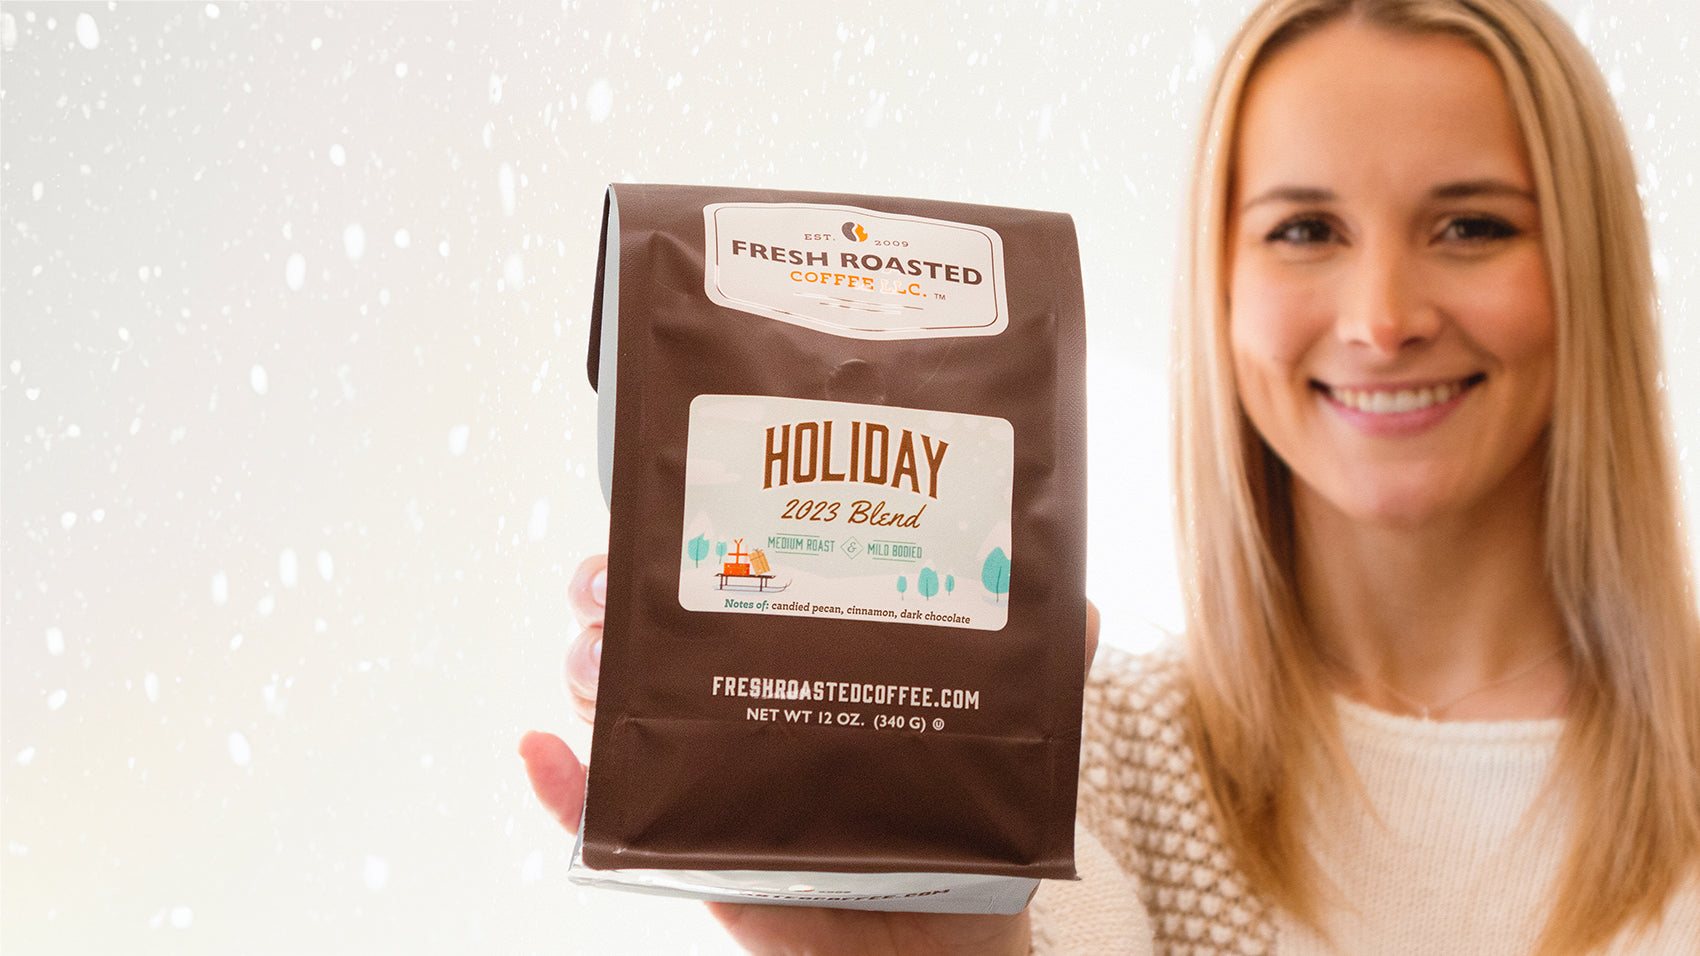 Woman smiling for real, holding a bag of coffee with snow in the background.